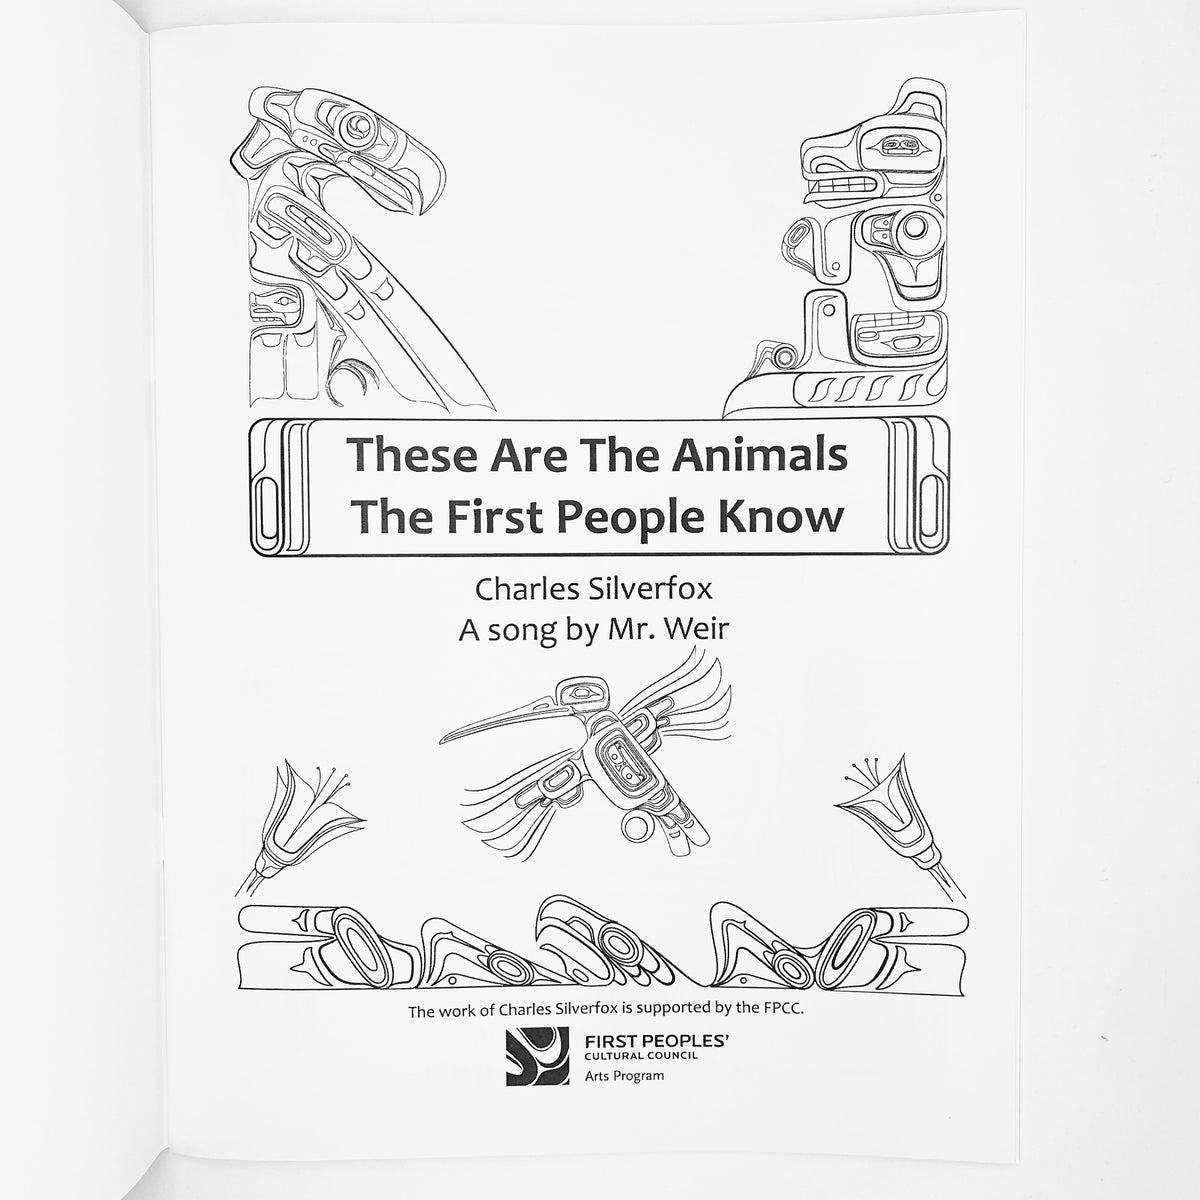 These Are The Animals The First People Know – Colouring Book